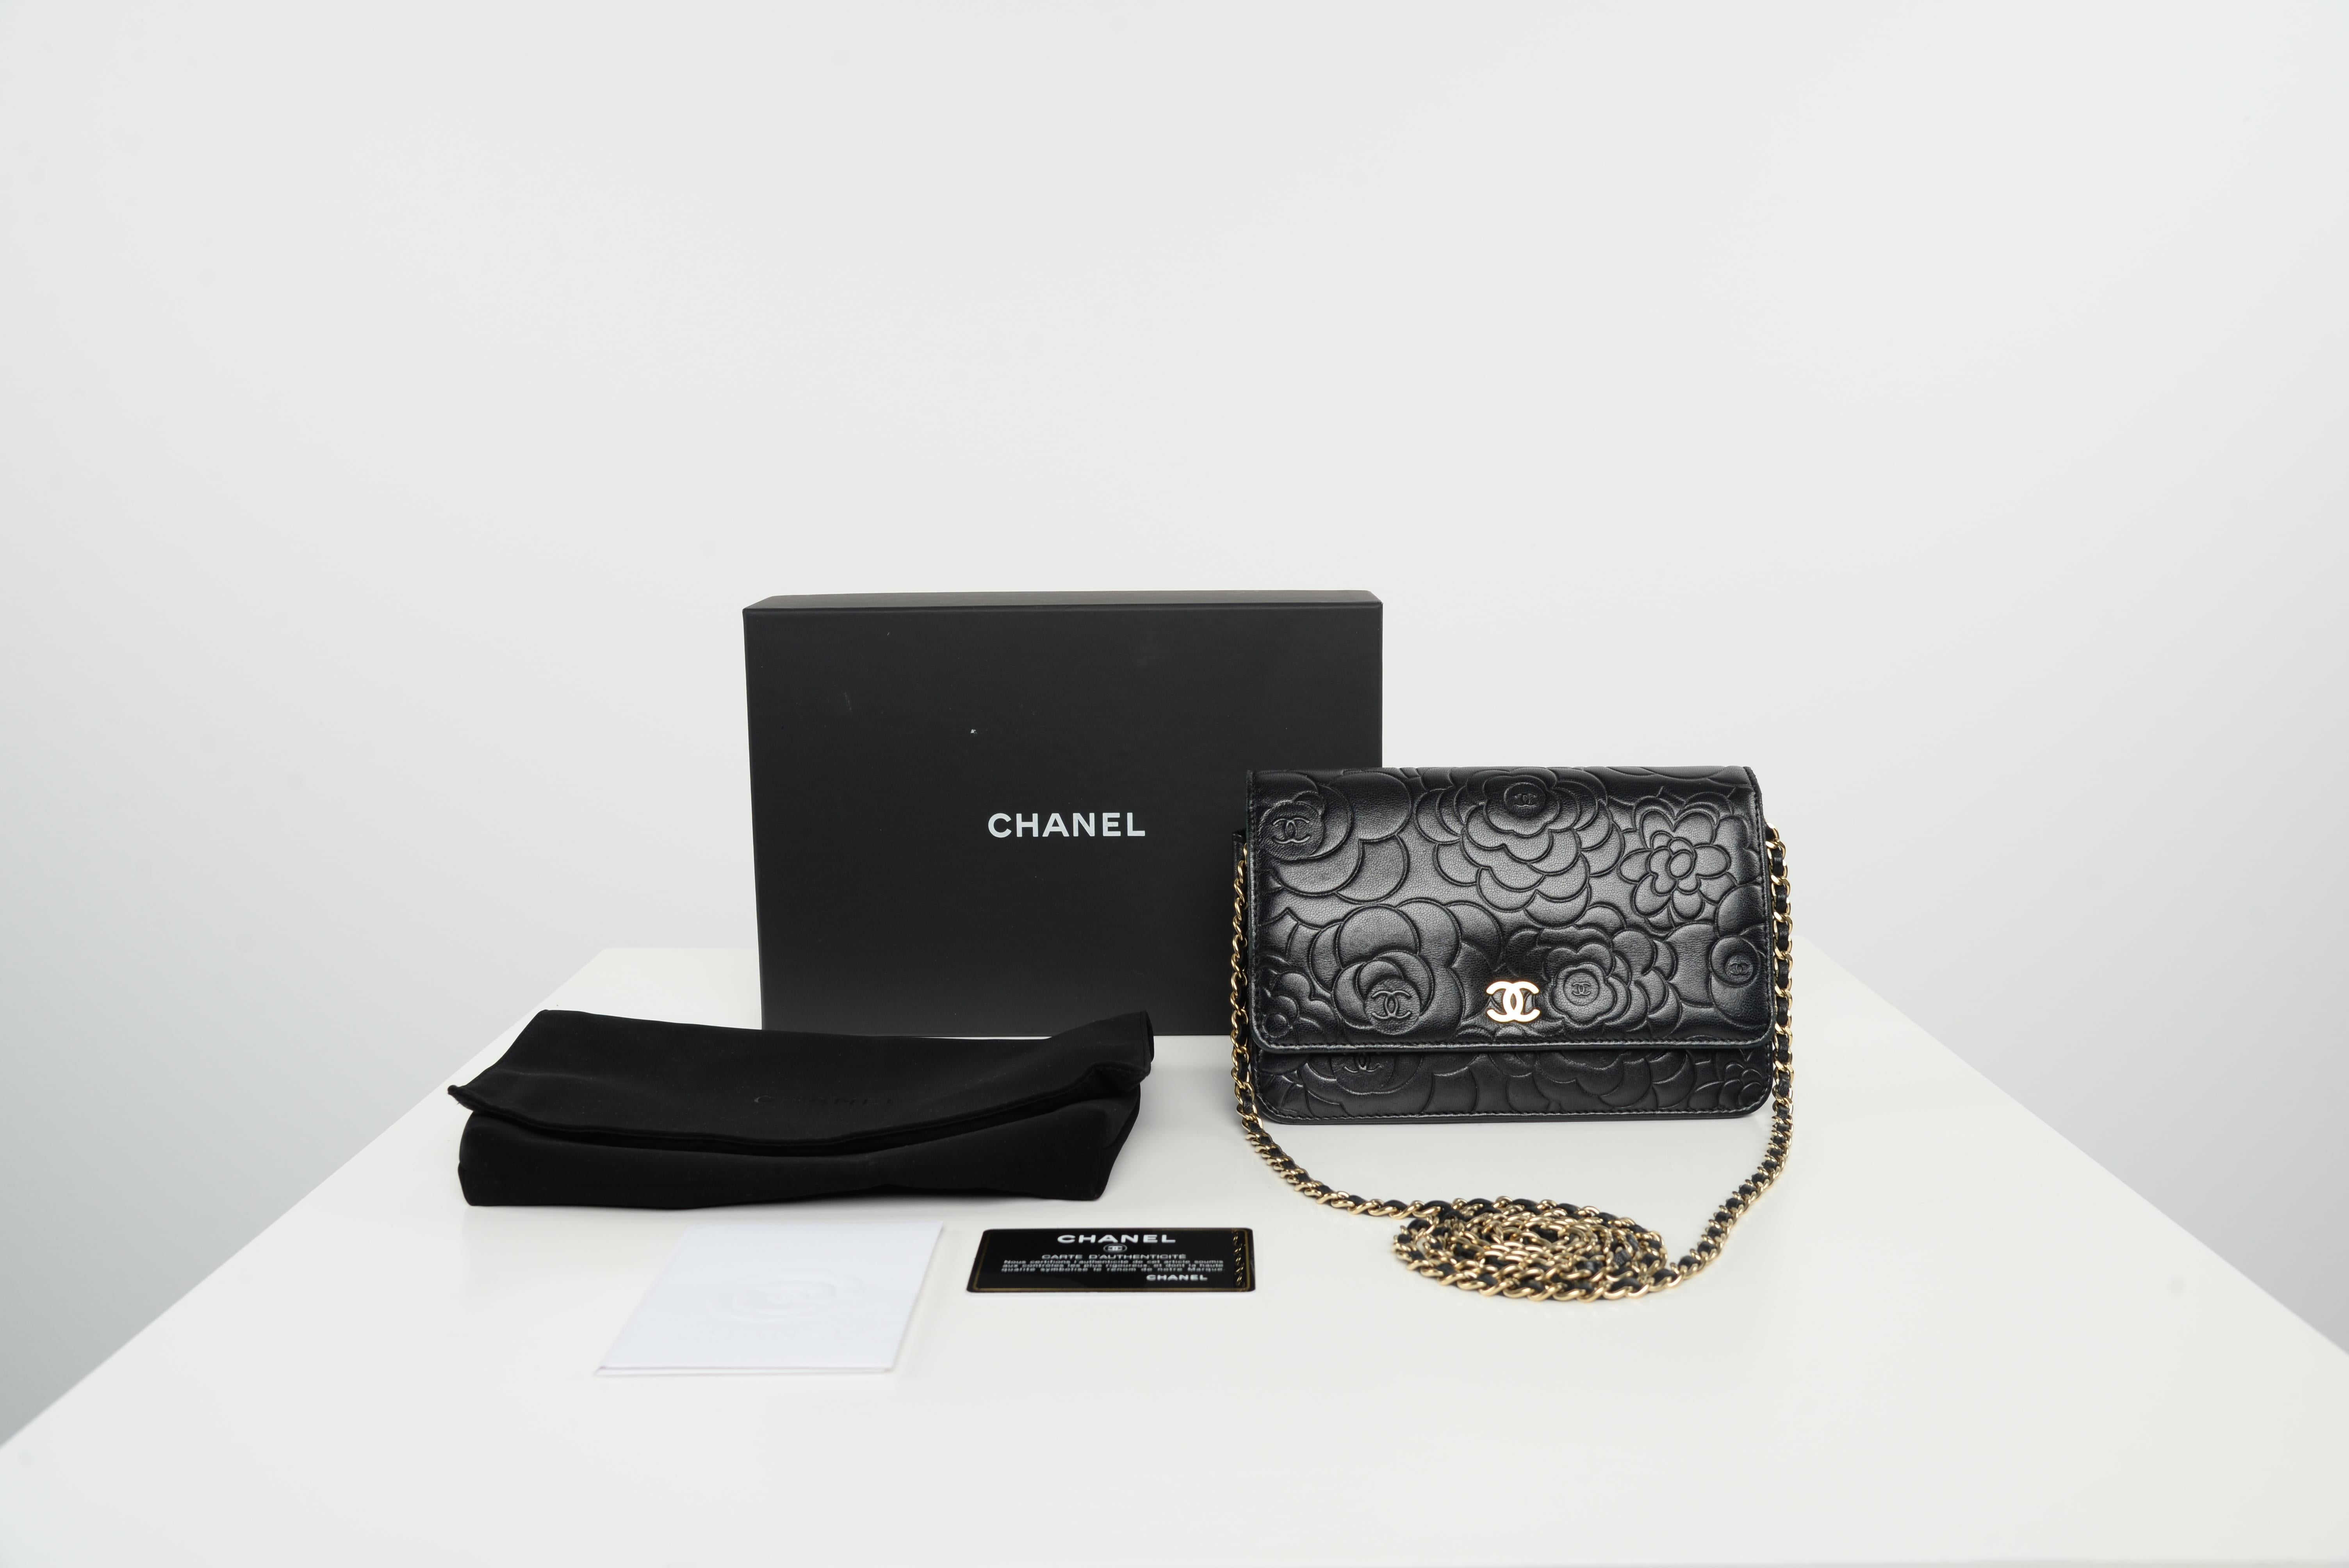 From the collection of SAVINETI we offer this Chanel Camellia WOC:
-	Brand: Chanel
-	Model: Camellia WOC
-	Year: 2015
-	Condition: Good
-	Materials: lambskin leather
-	Extras: Full-Set (authenticity card, box, dustbag & receipt)

We at SAVINETI sell